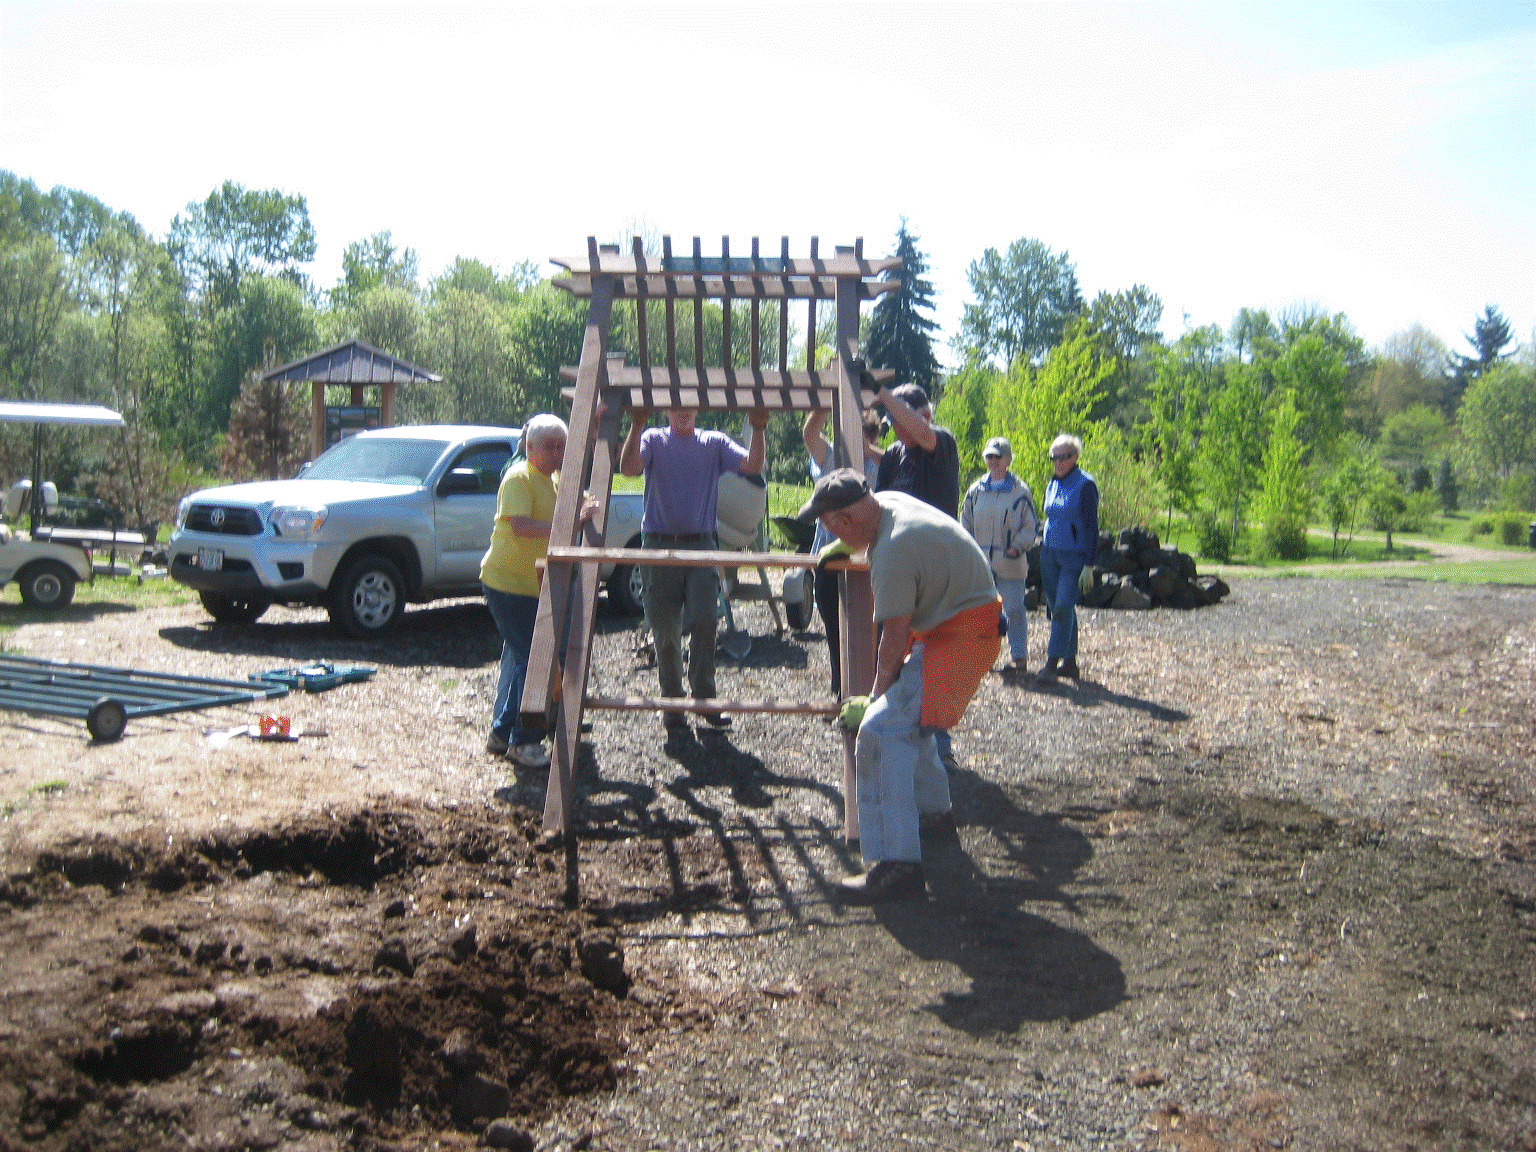 Installing one of may kiosk in the arboretum